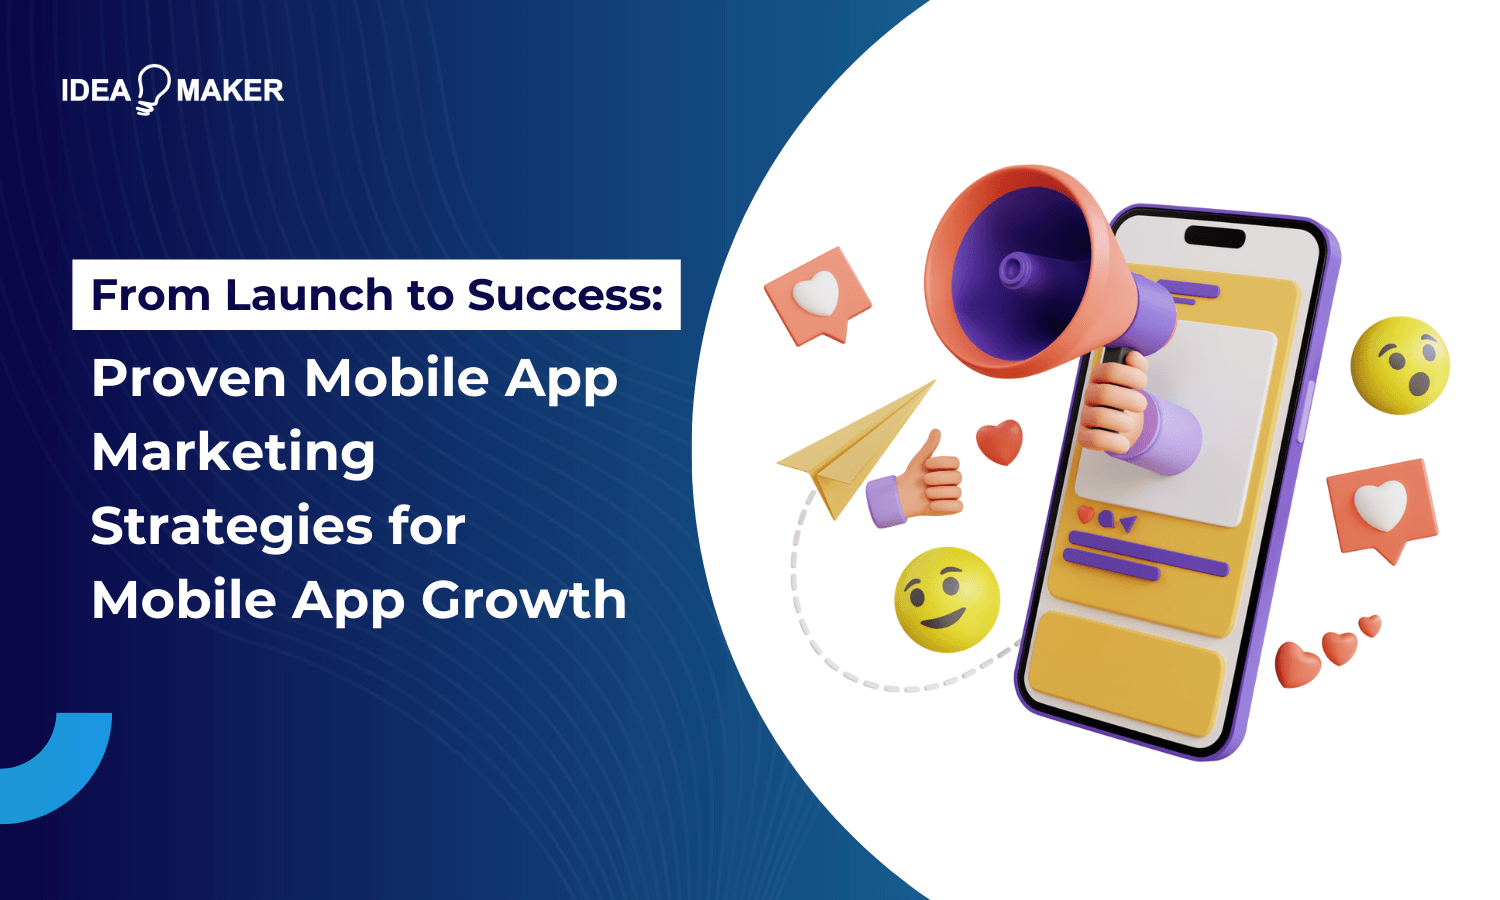 From Launch to Success Proven Mobile App Marketing Strategies for Mobile App Growth